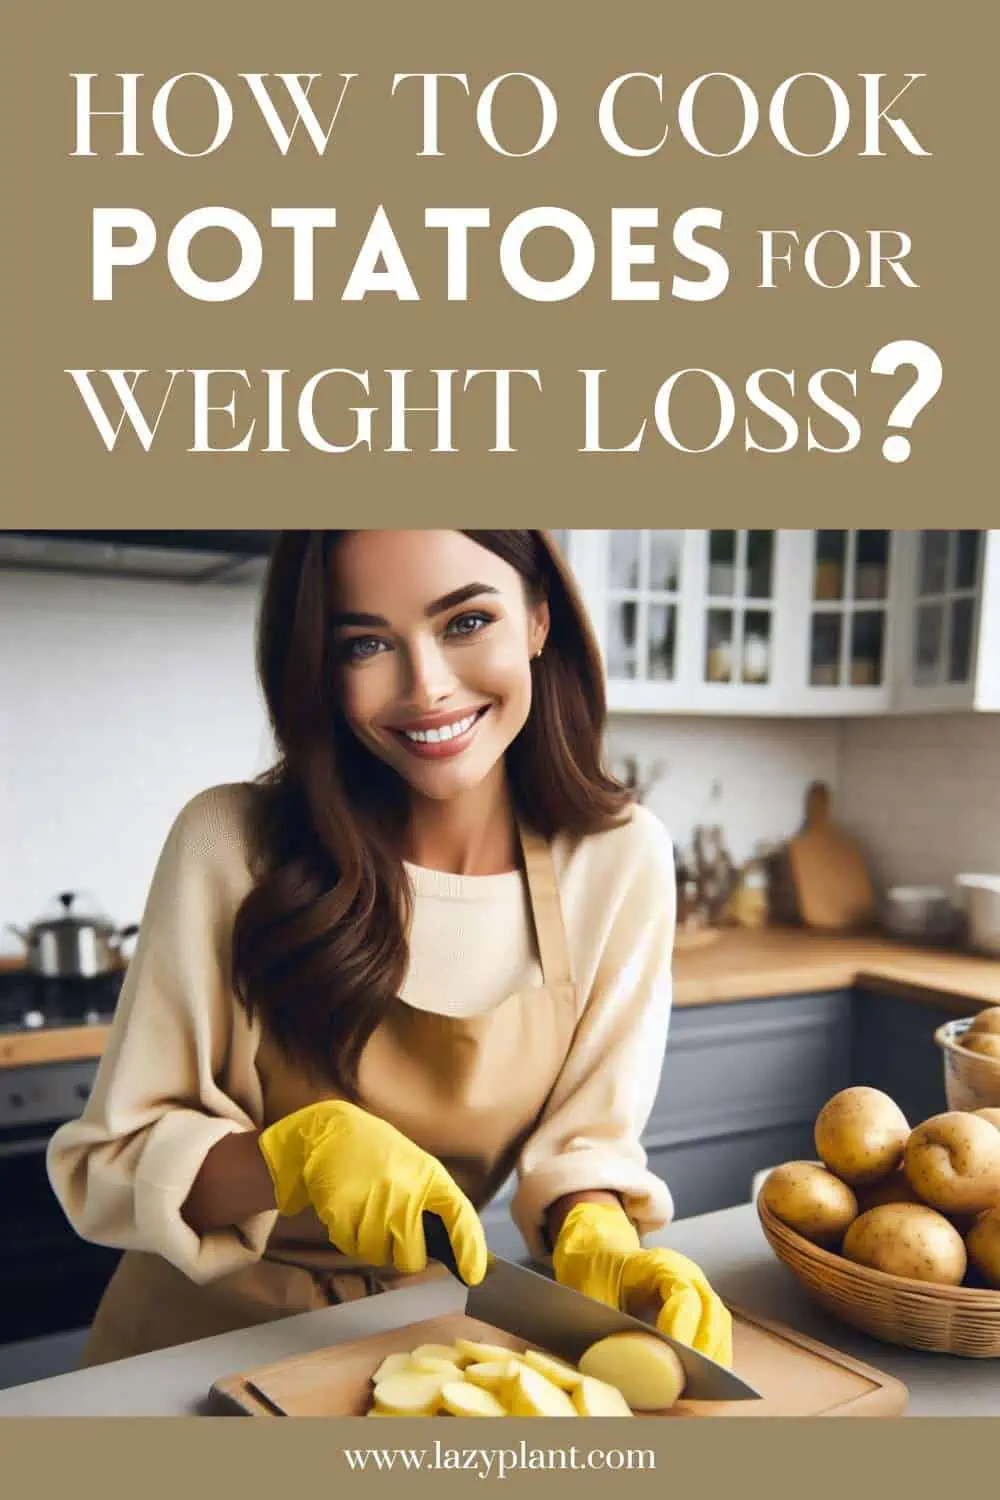 How to eat French fries or potatoes for Weight Loss?